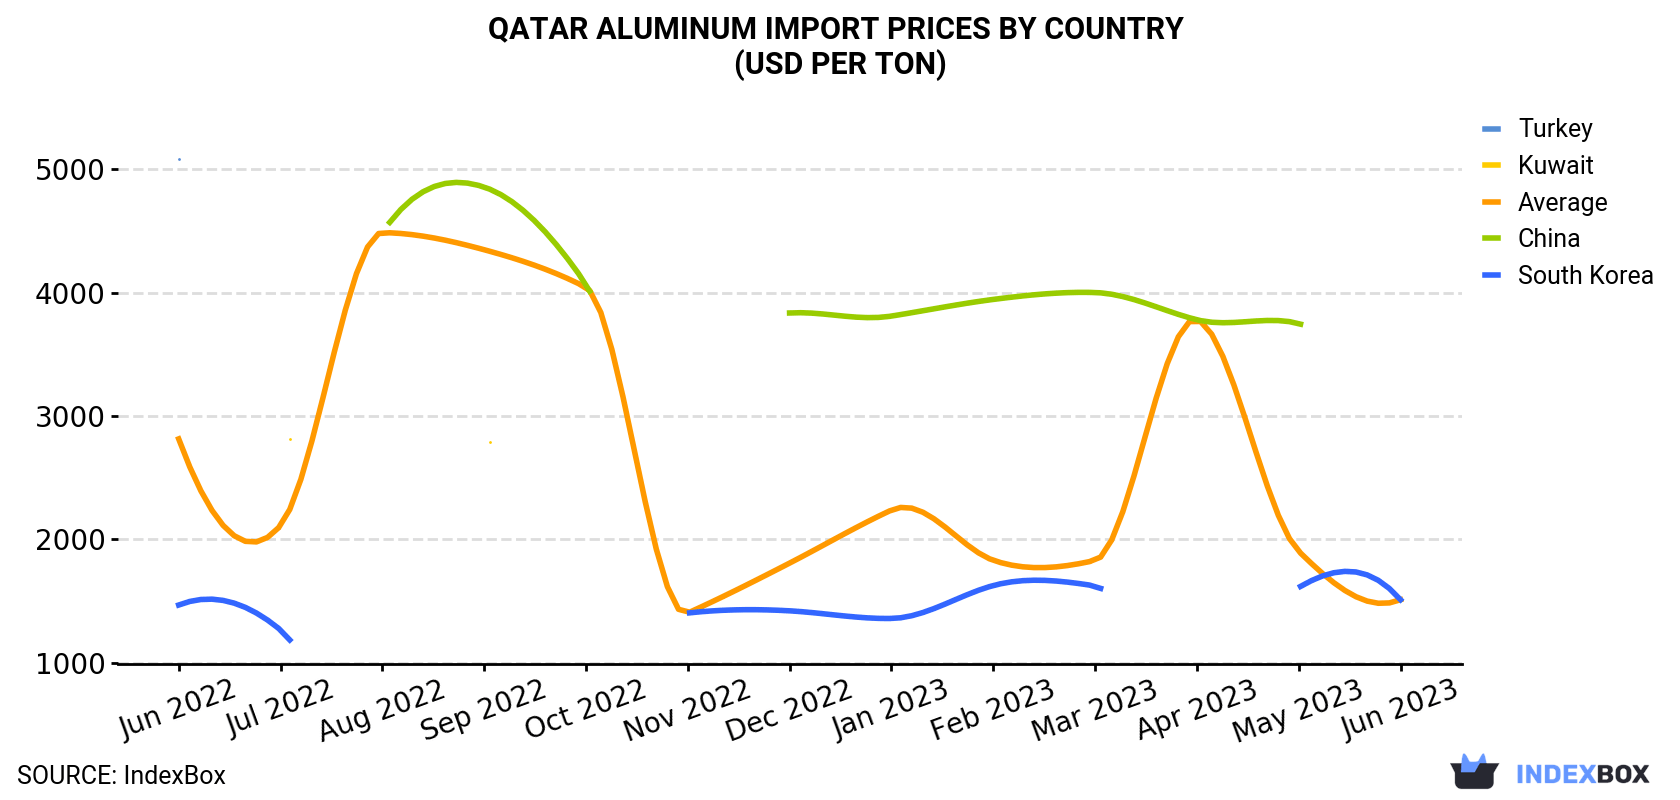 Qatar Aluminum Import Prices By Country (USD Per Ton)